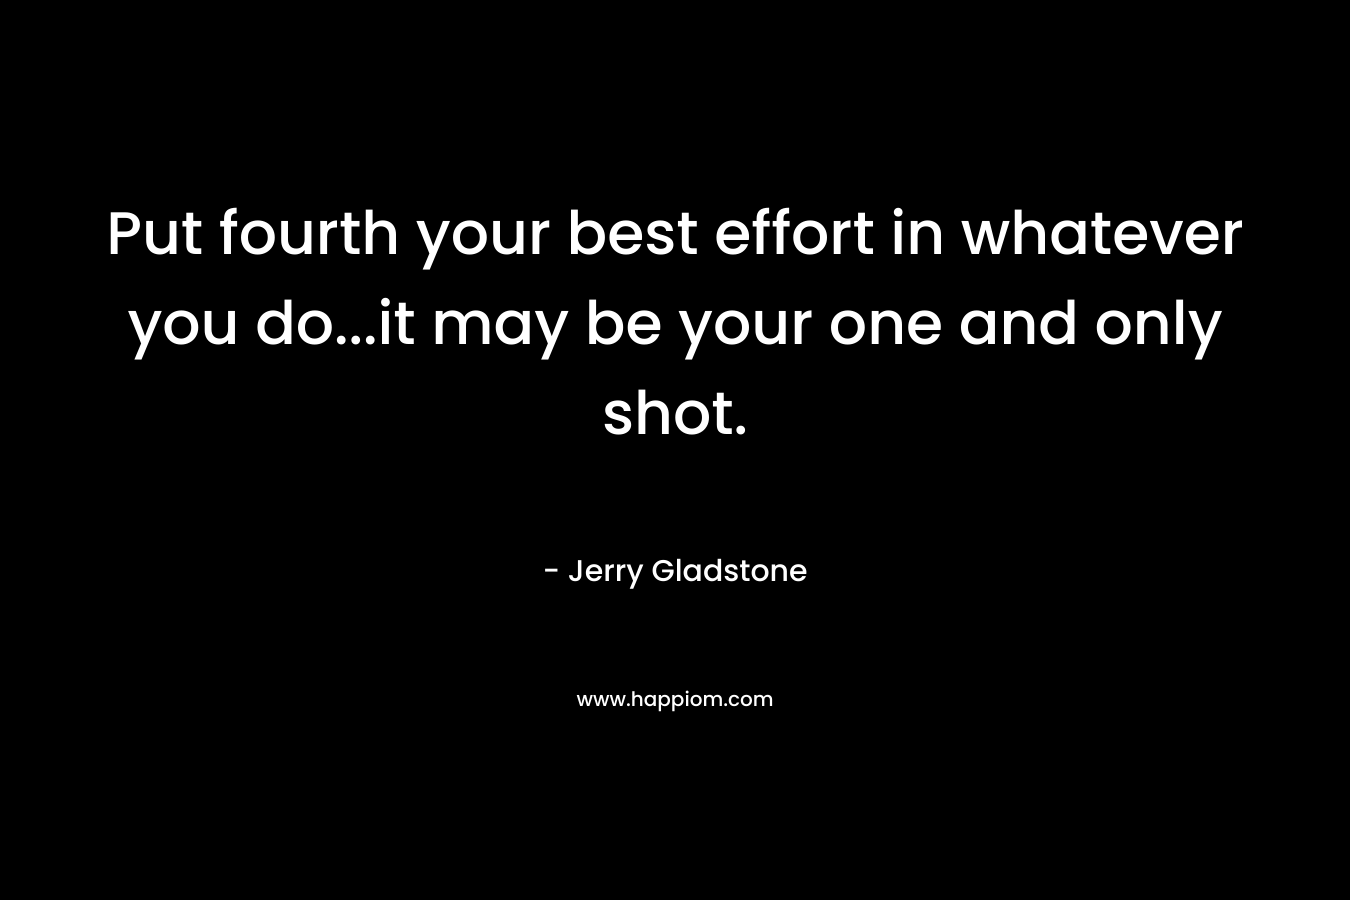 Put fourth your best effort in whatever you do...it may be your one and only shot.